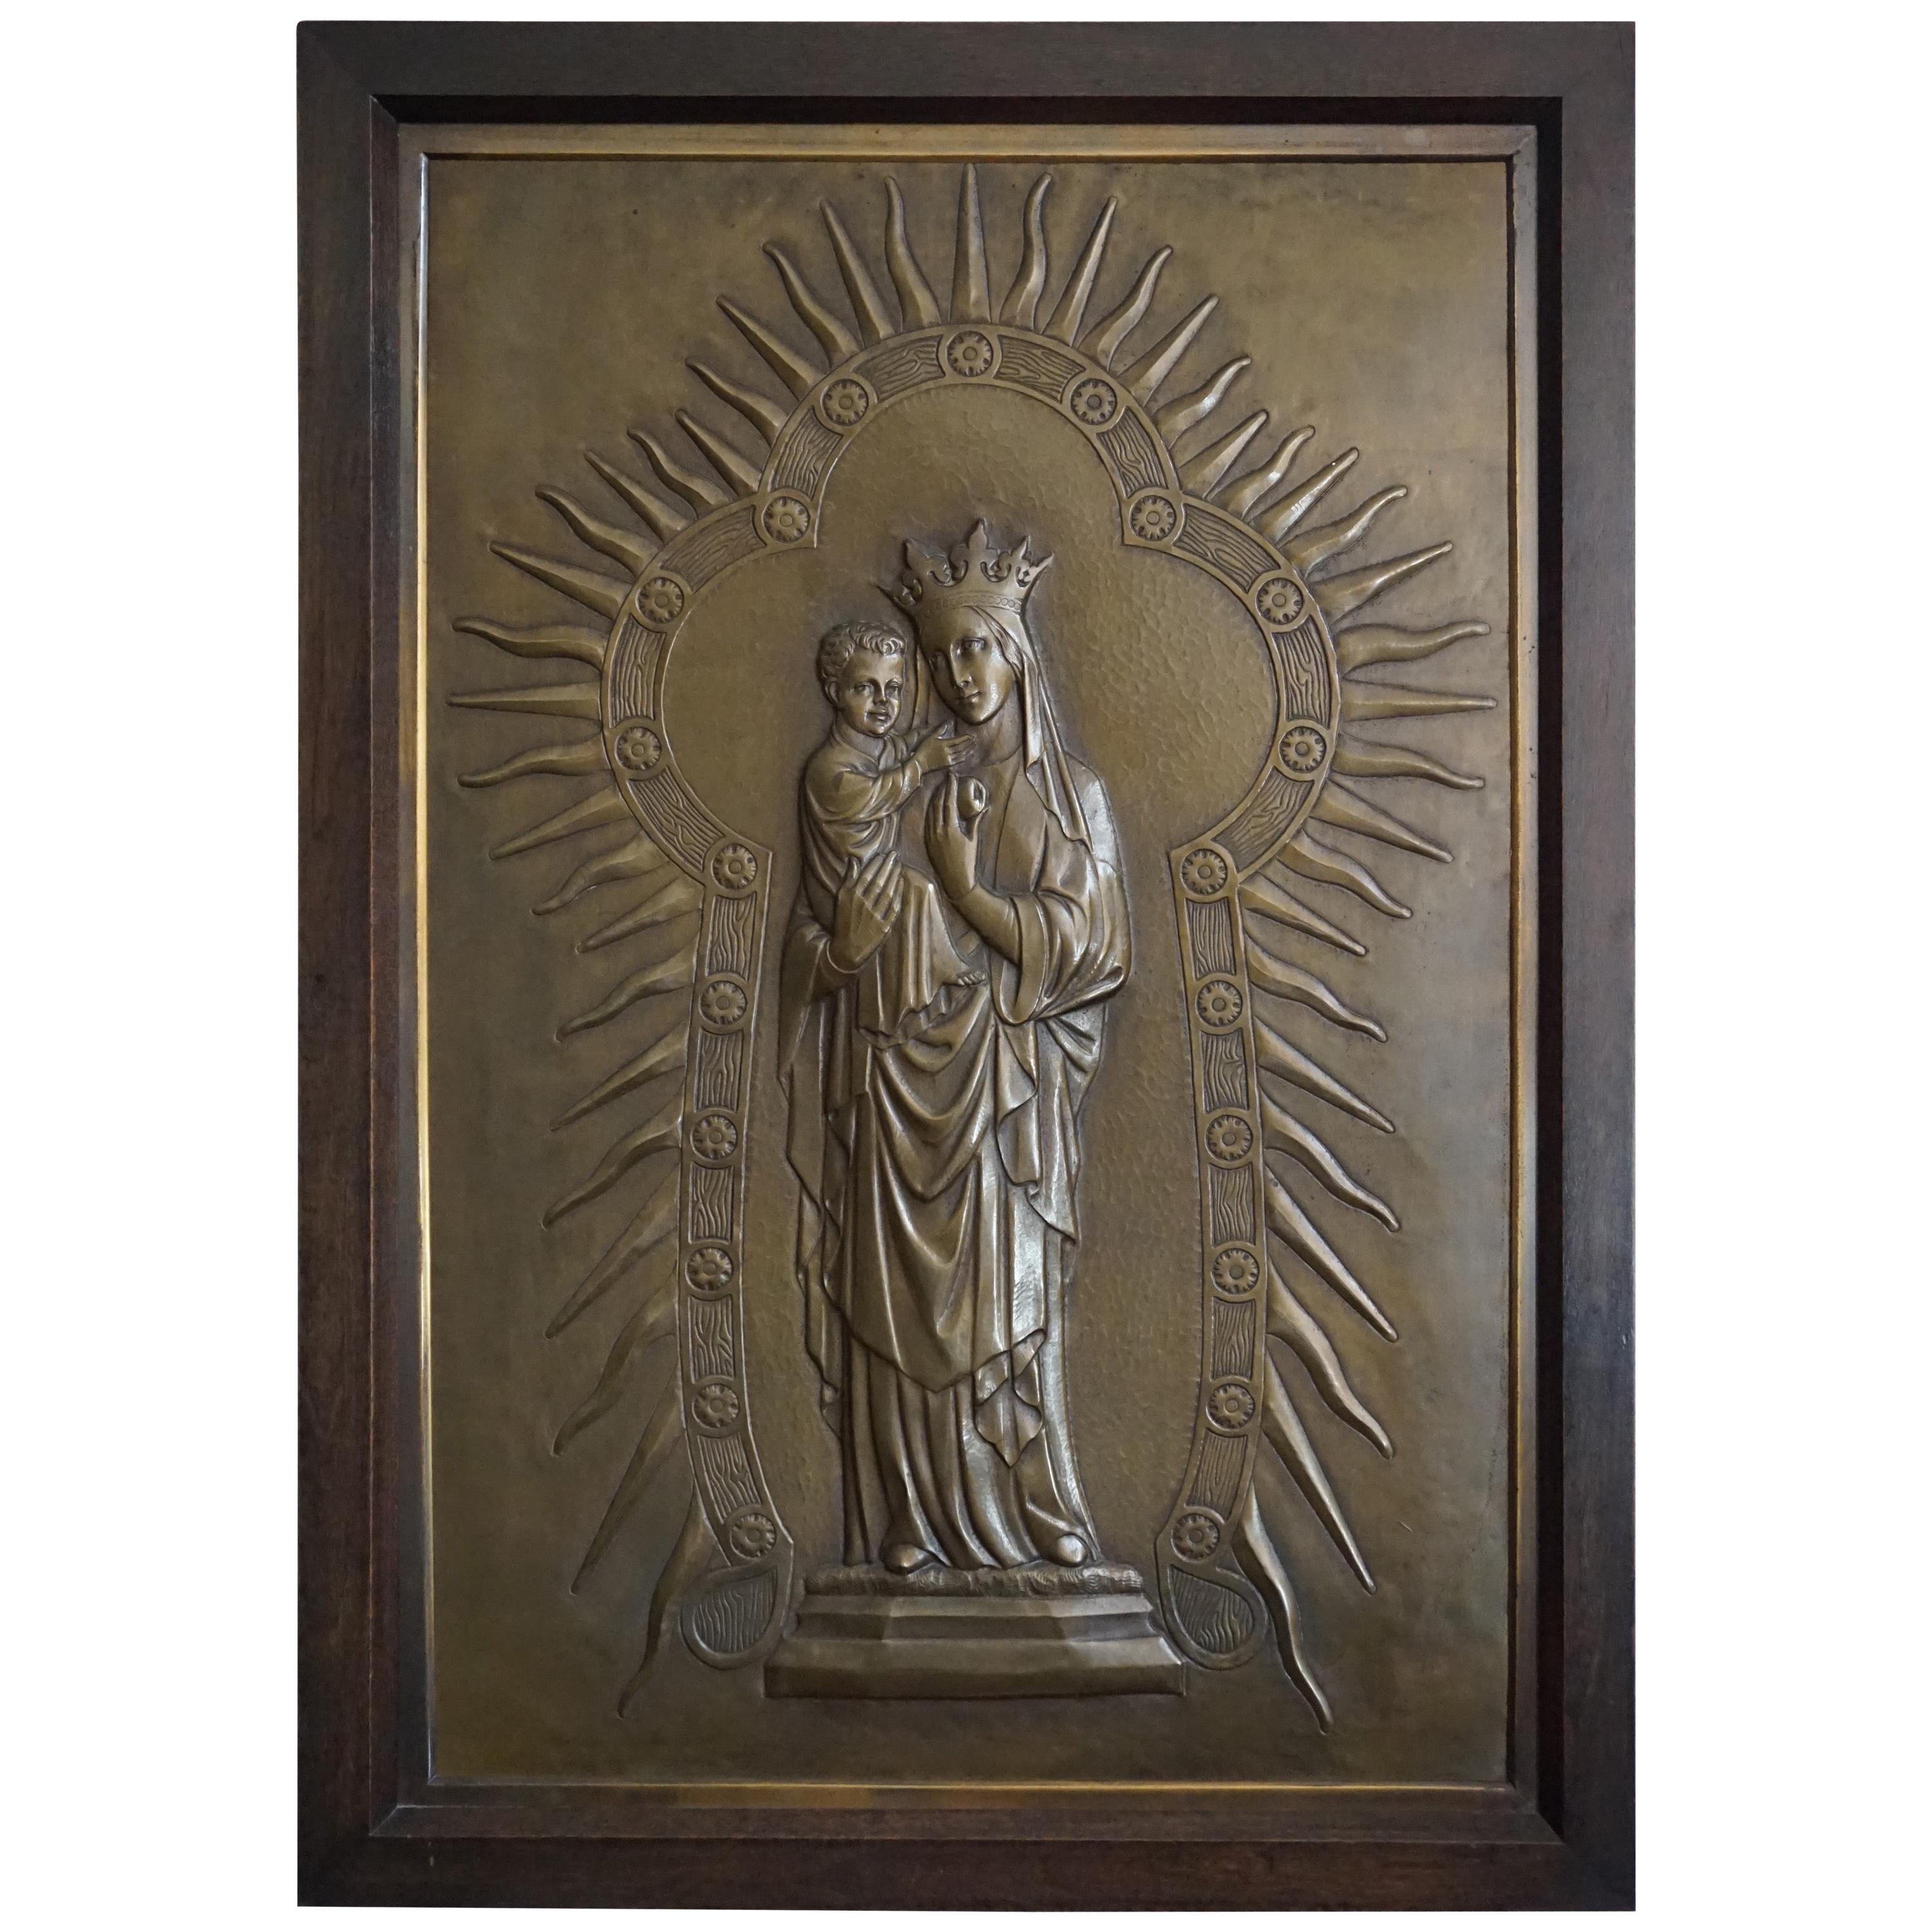 Antique Mary and Child Jesus Gothic Revival Brass Church Wall Plaque / Sculpture